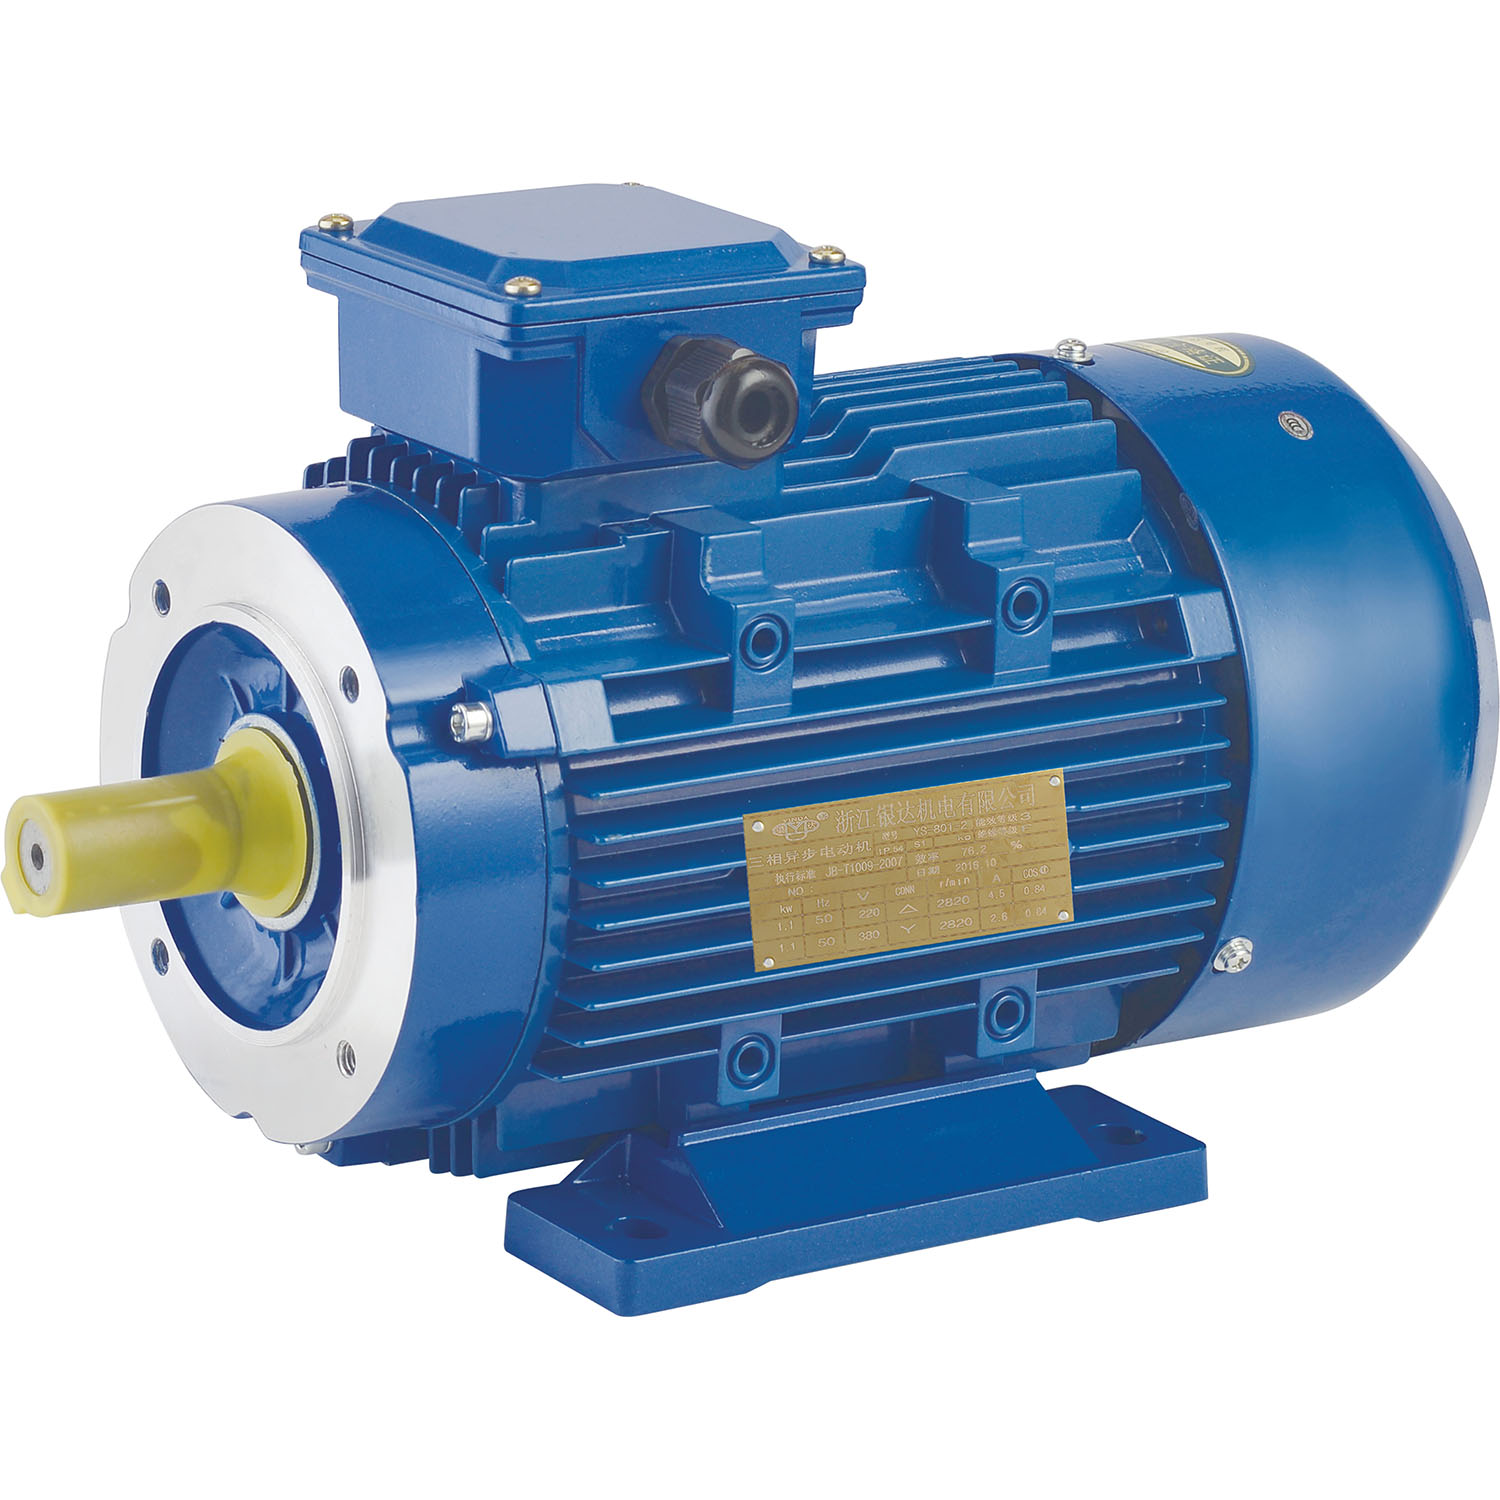 YS-712-6 0.25KW 0.33HP aluminum cylinder series high efficiency three-phase asynchronous motor